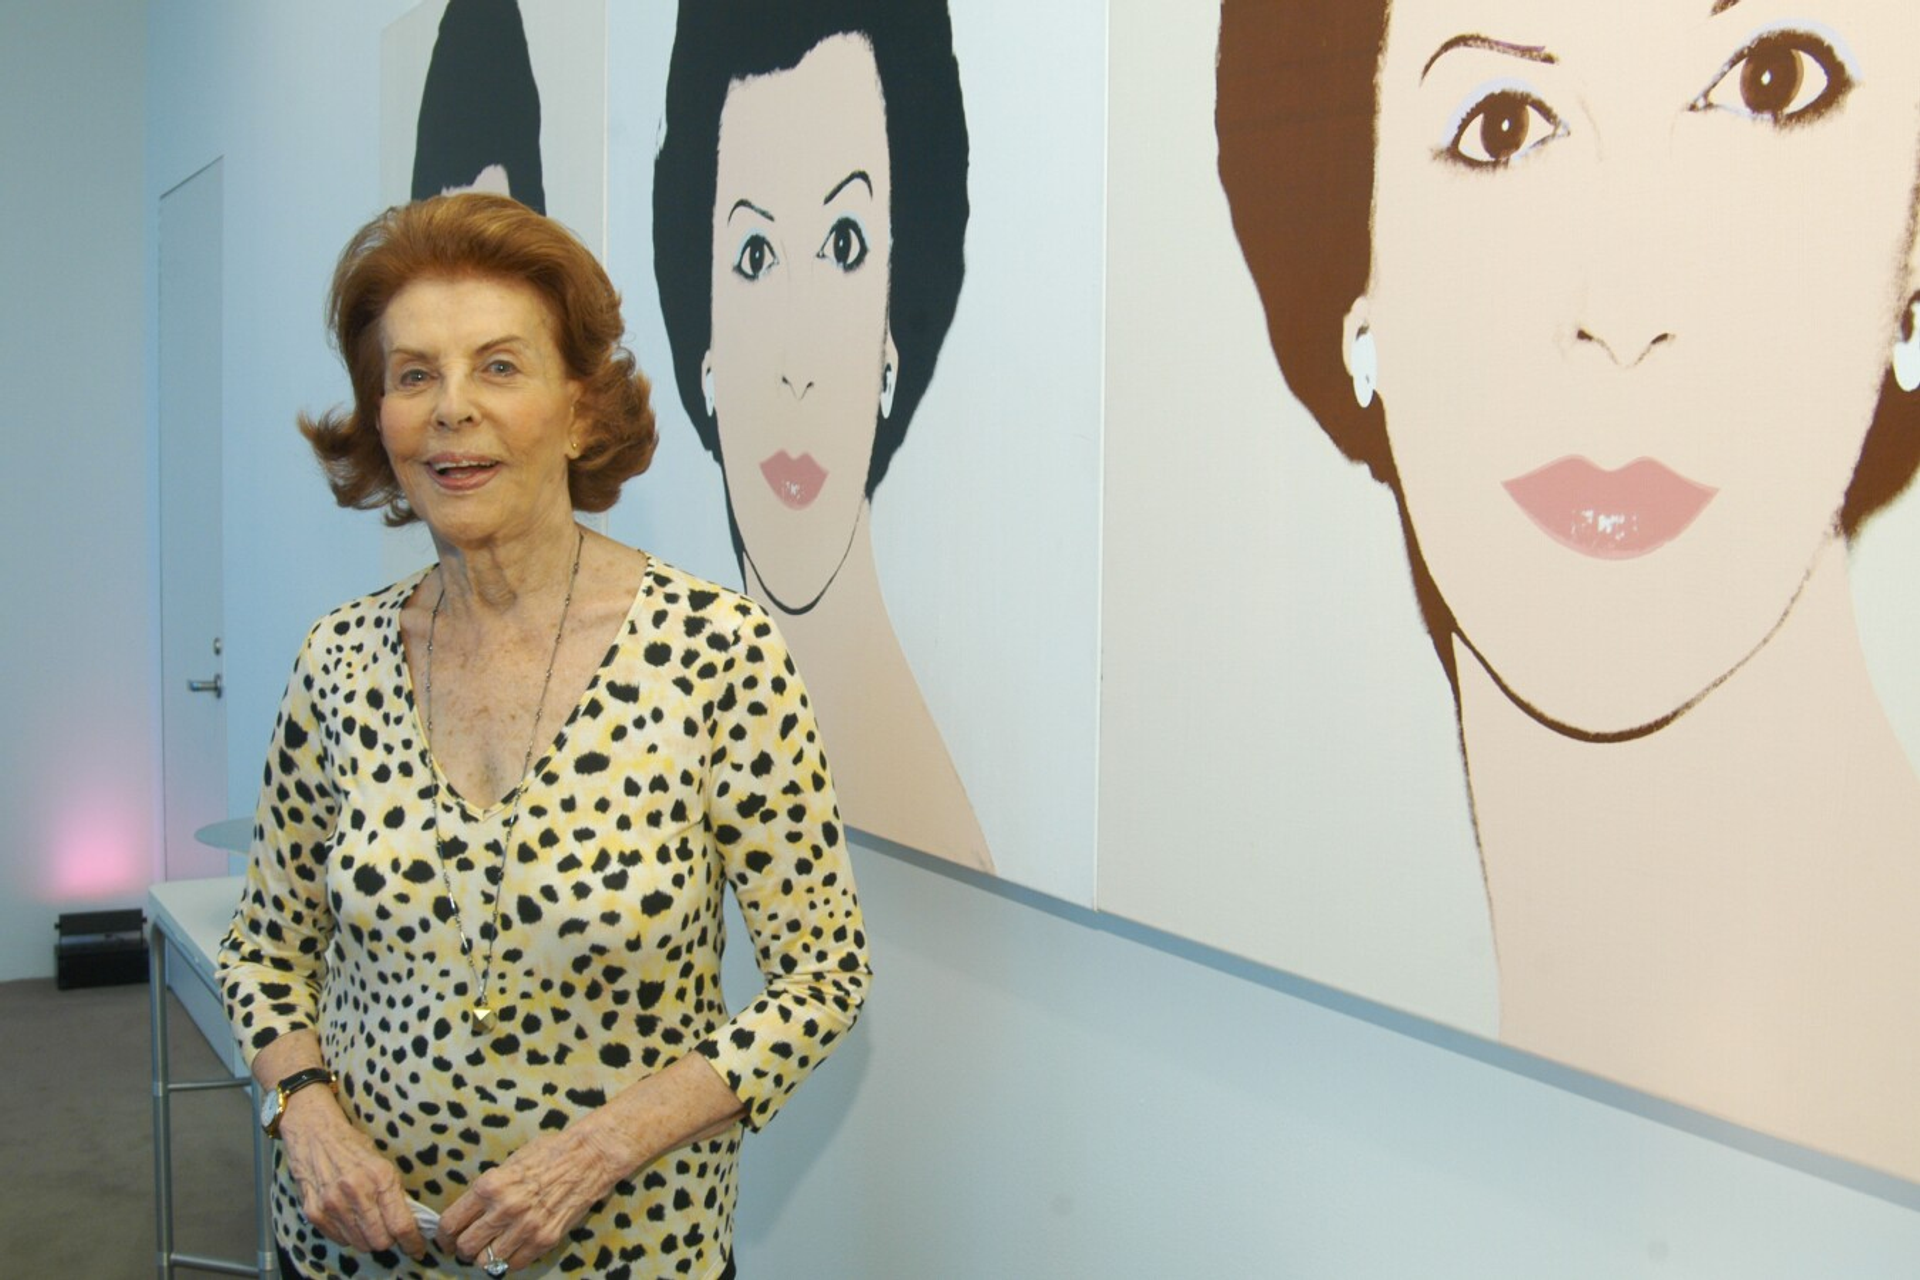 This photograph shows Emily Fisher Landau in front of a series of portraits done of her by Andy Warhol.